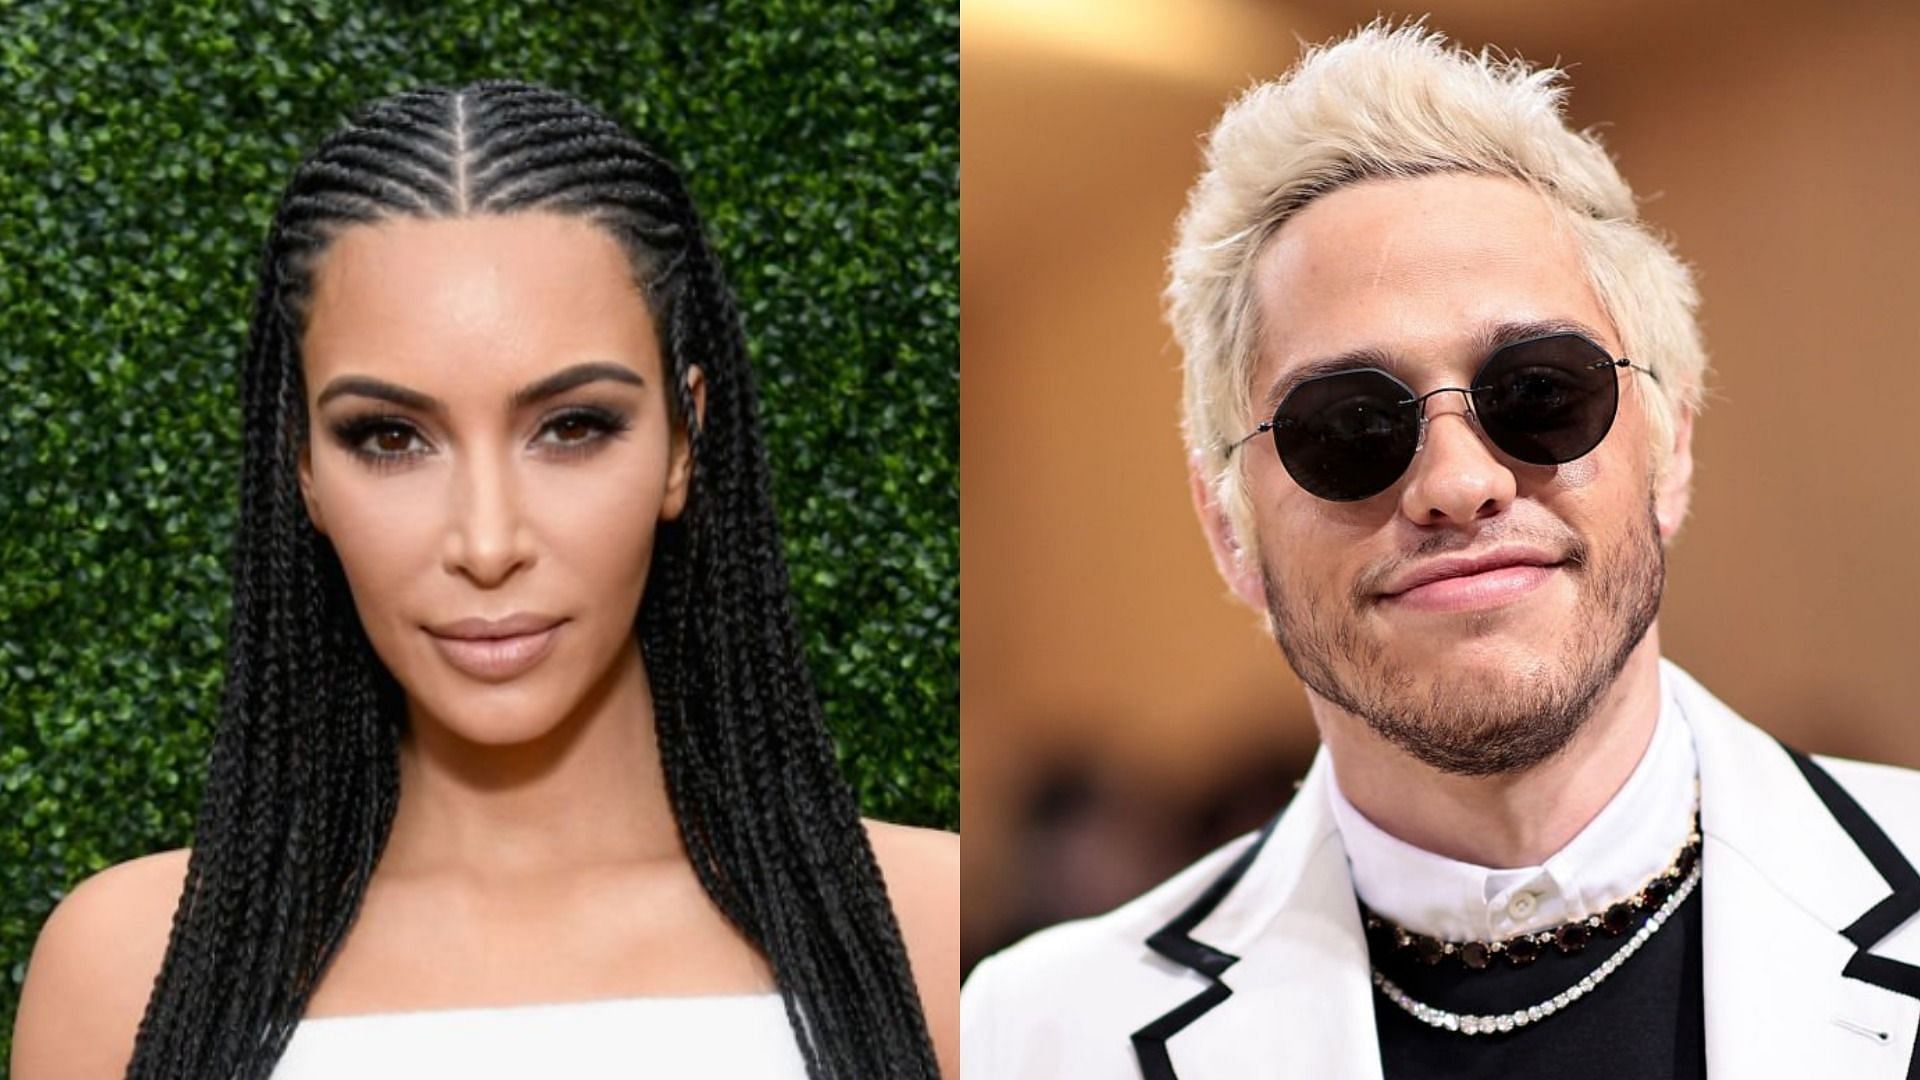 Kim Kardashian revealed Pete Davidson has multiple tattoos and a branding dedicated to her (Image via Emma McIntyre/Getty Images &amp; Dimitrios Kambouris/Getty Images)